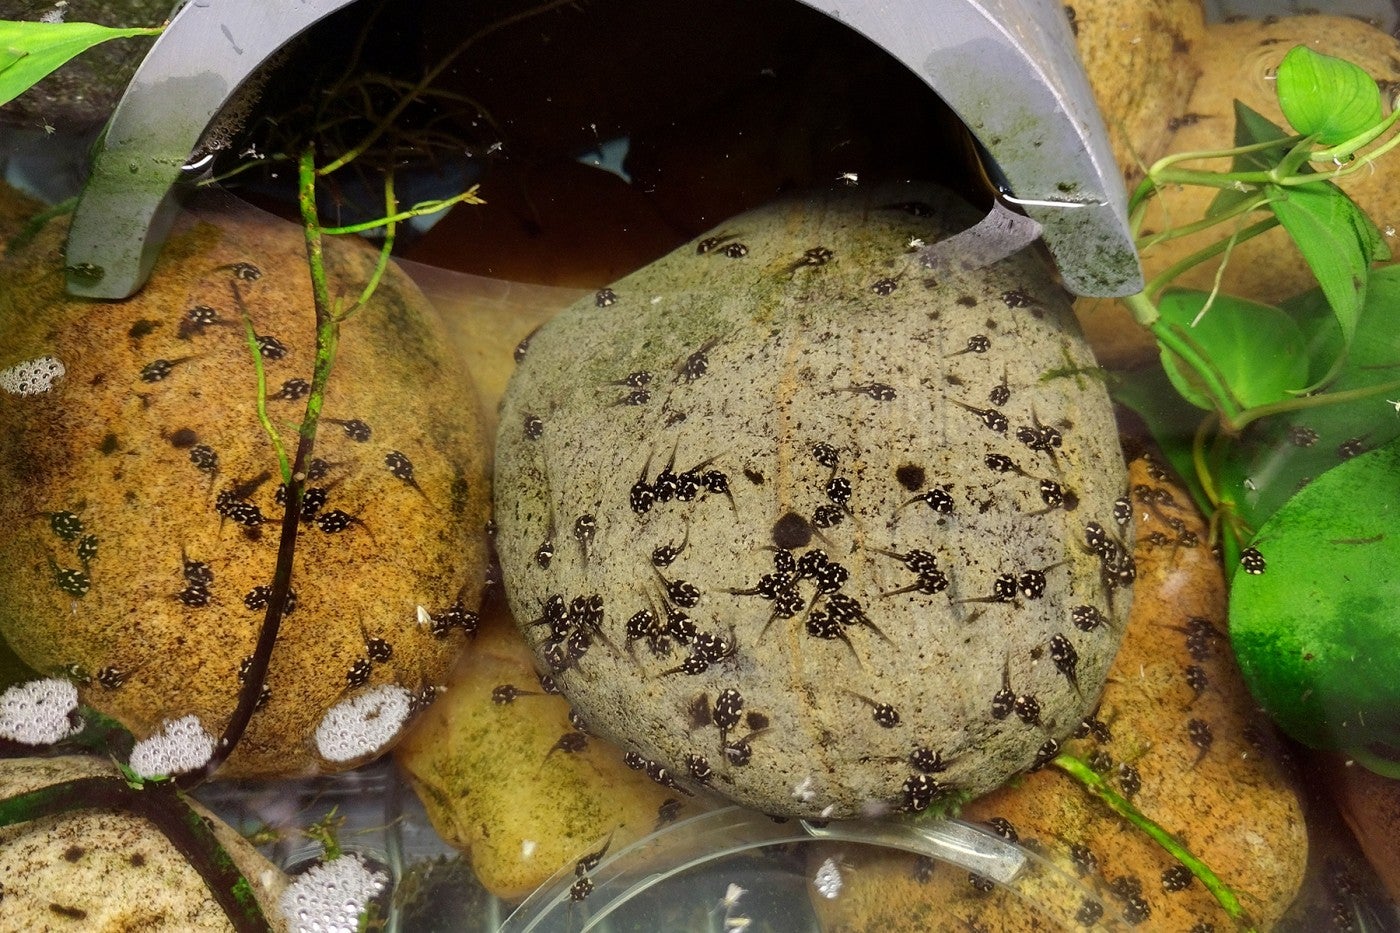 Panamanian golden frog tadpoles eat algae and diatoms off the rocks in their enclosure.